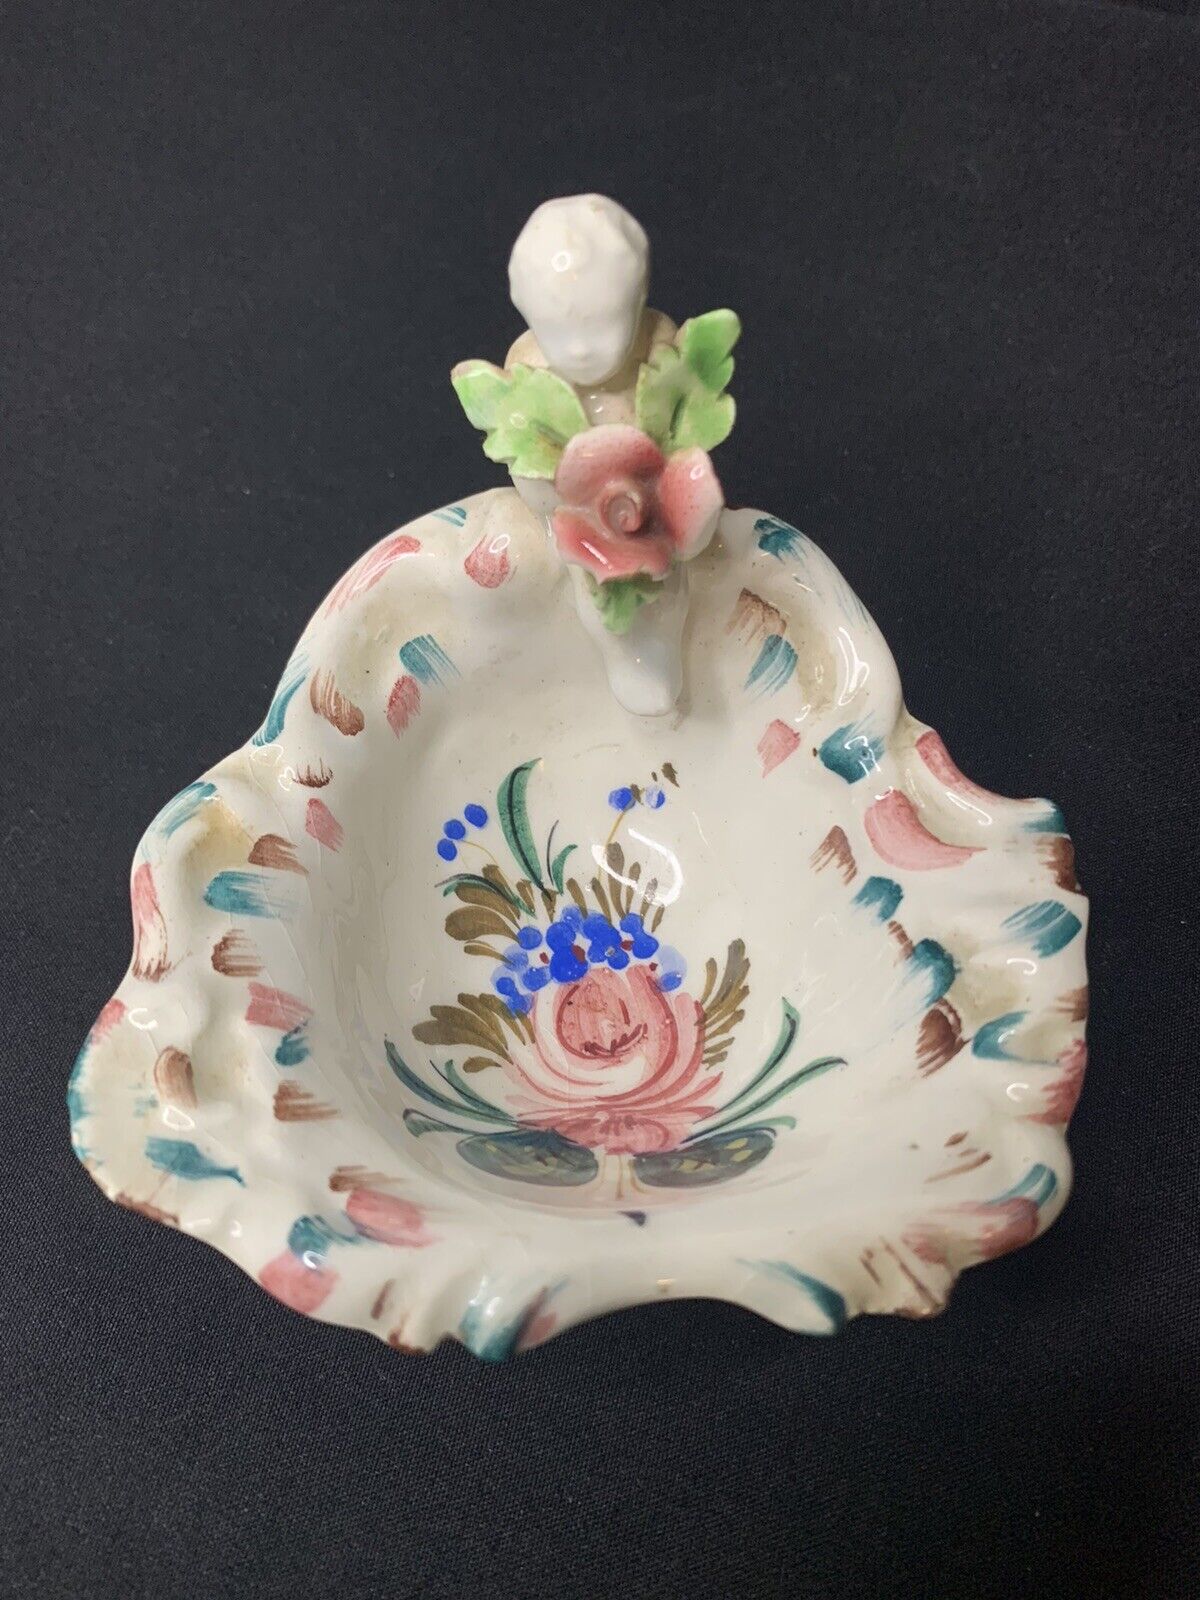 Handcrafted Italian Porcelain VTG Small Dish w/Cherub and Flowers 3.5” Wide